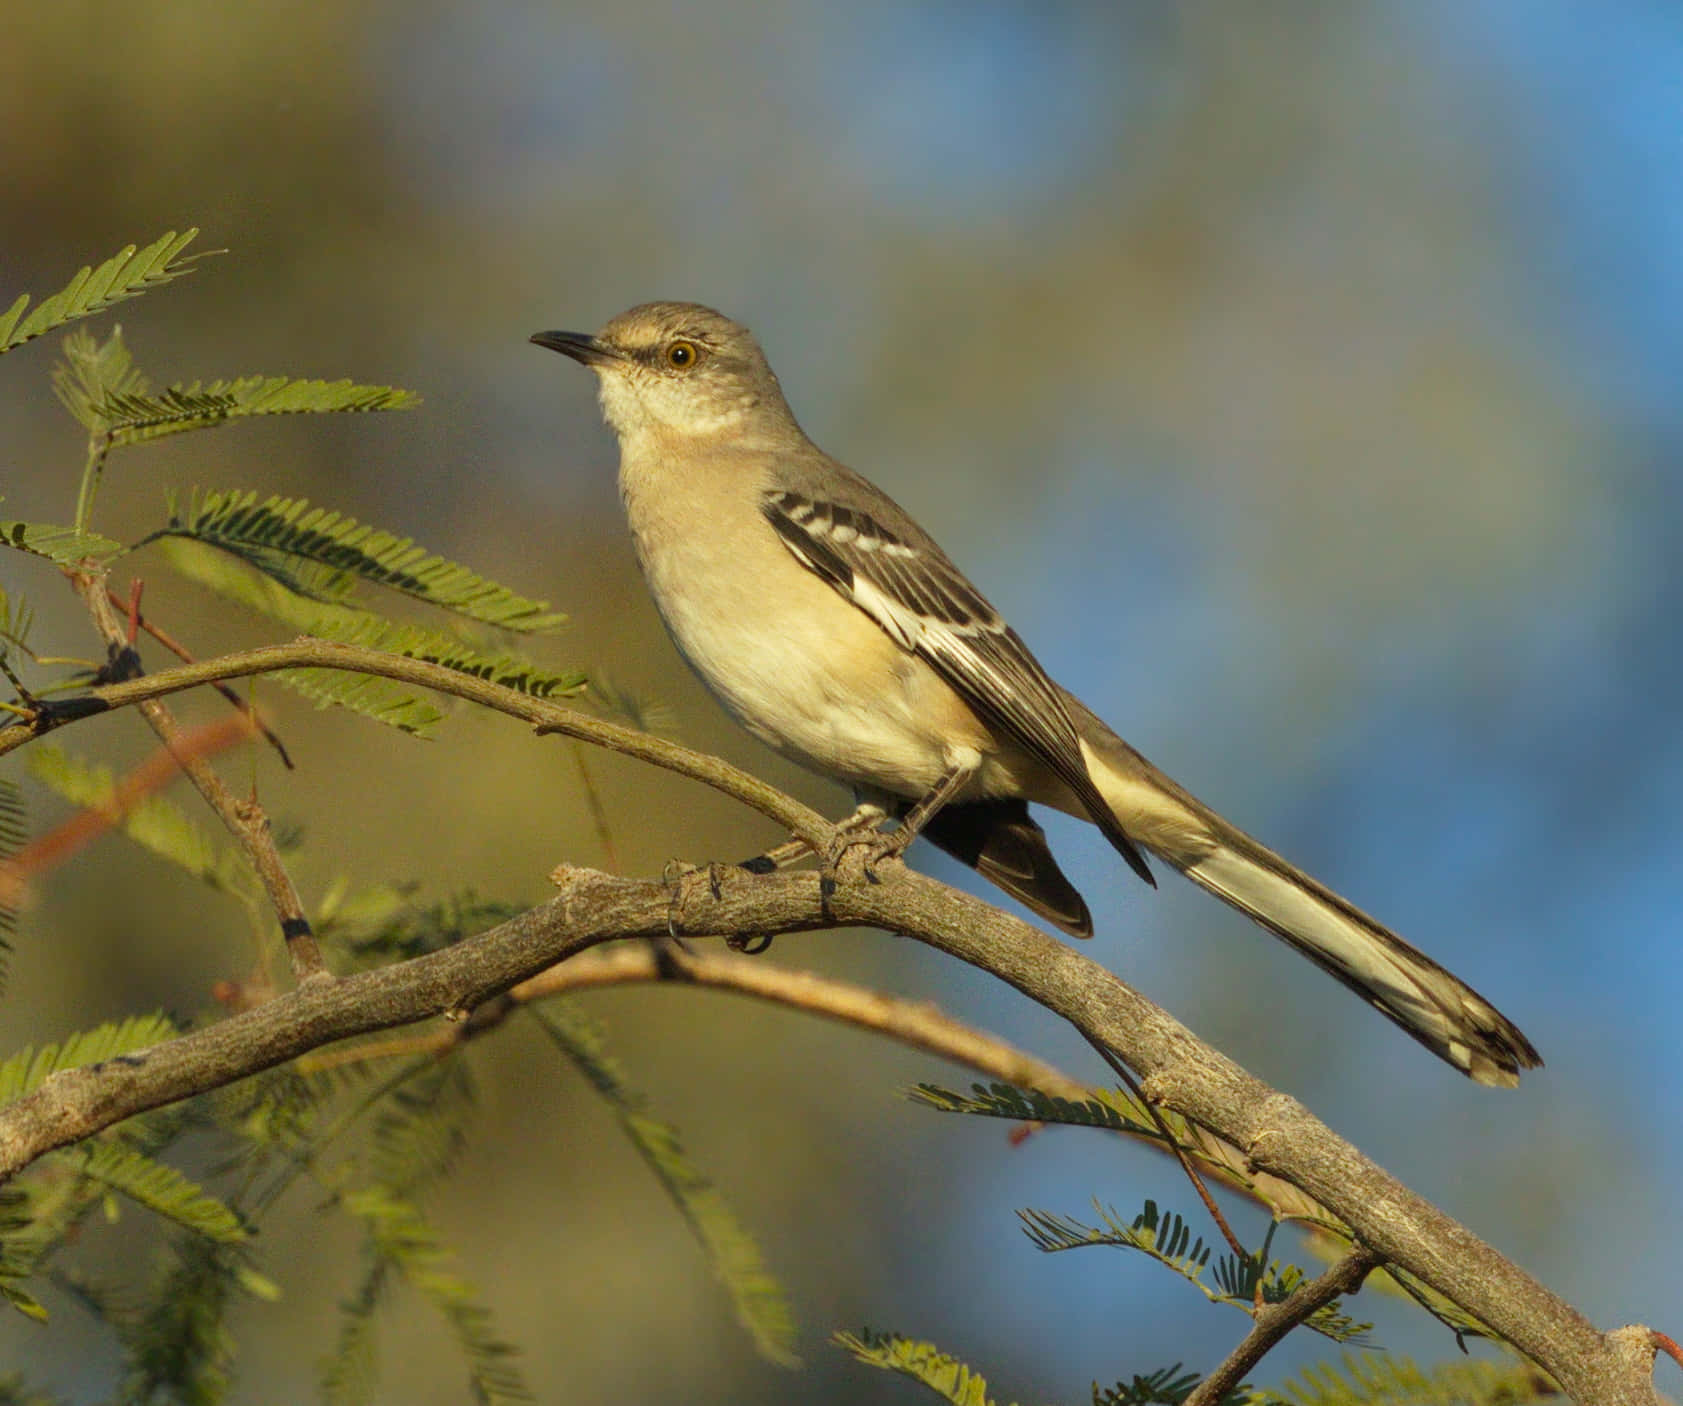 A bright evening sky spotted with a single Mockingbird